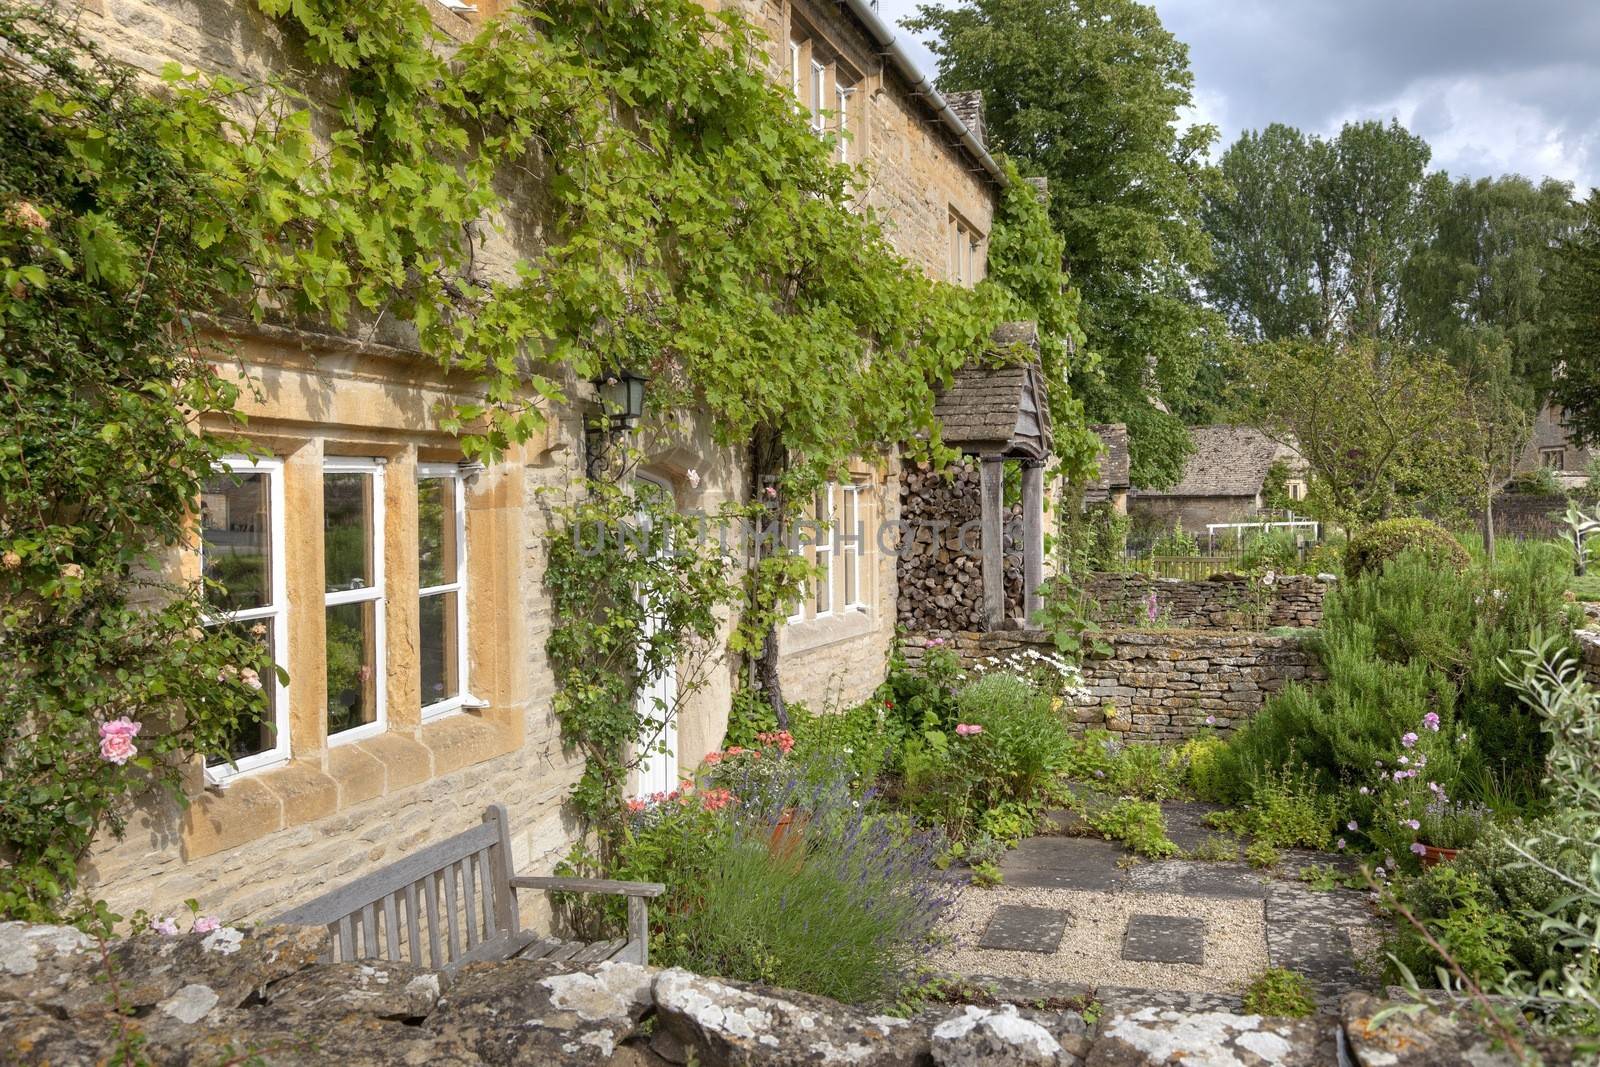 Pretty cottage gardens, Lower Slaughter, Gloucestershire, England.